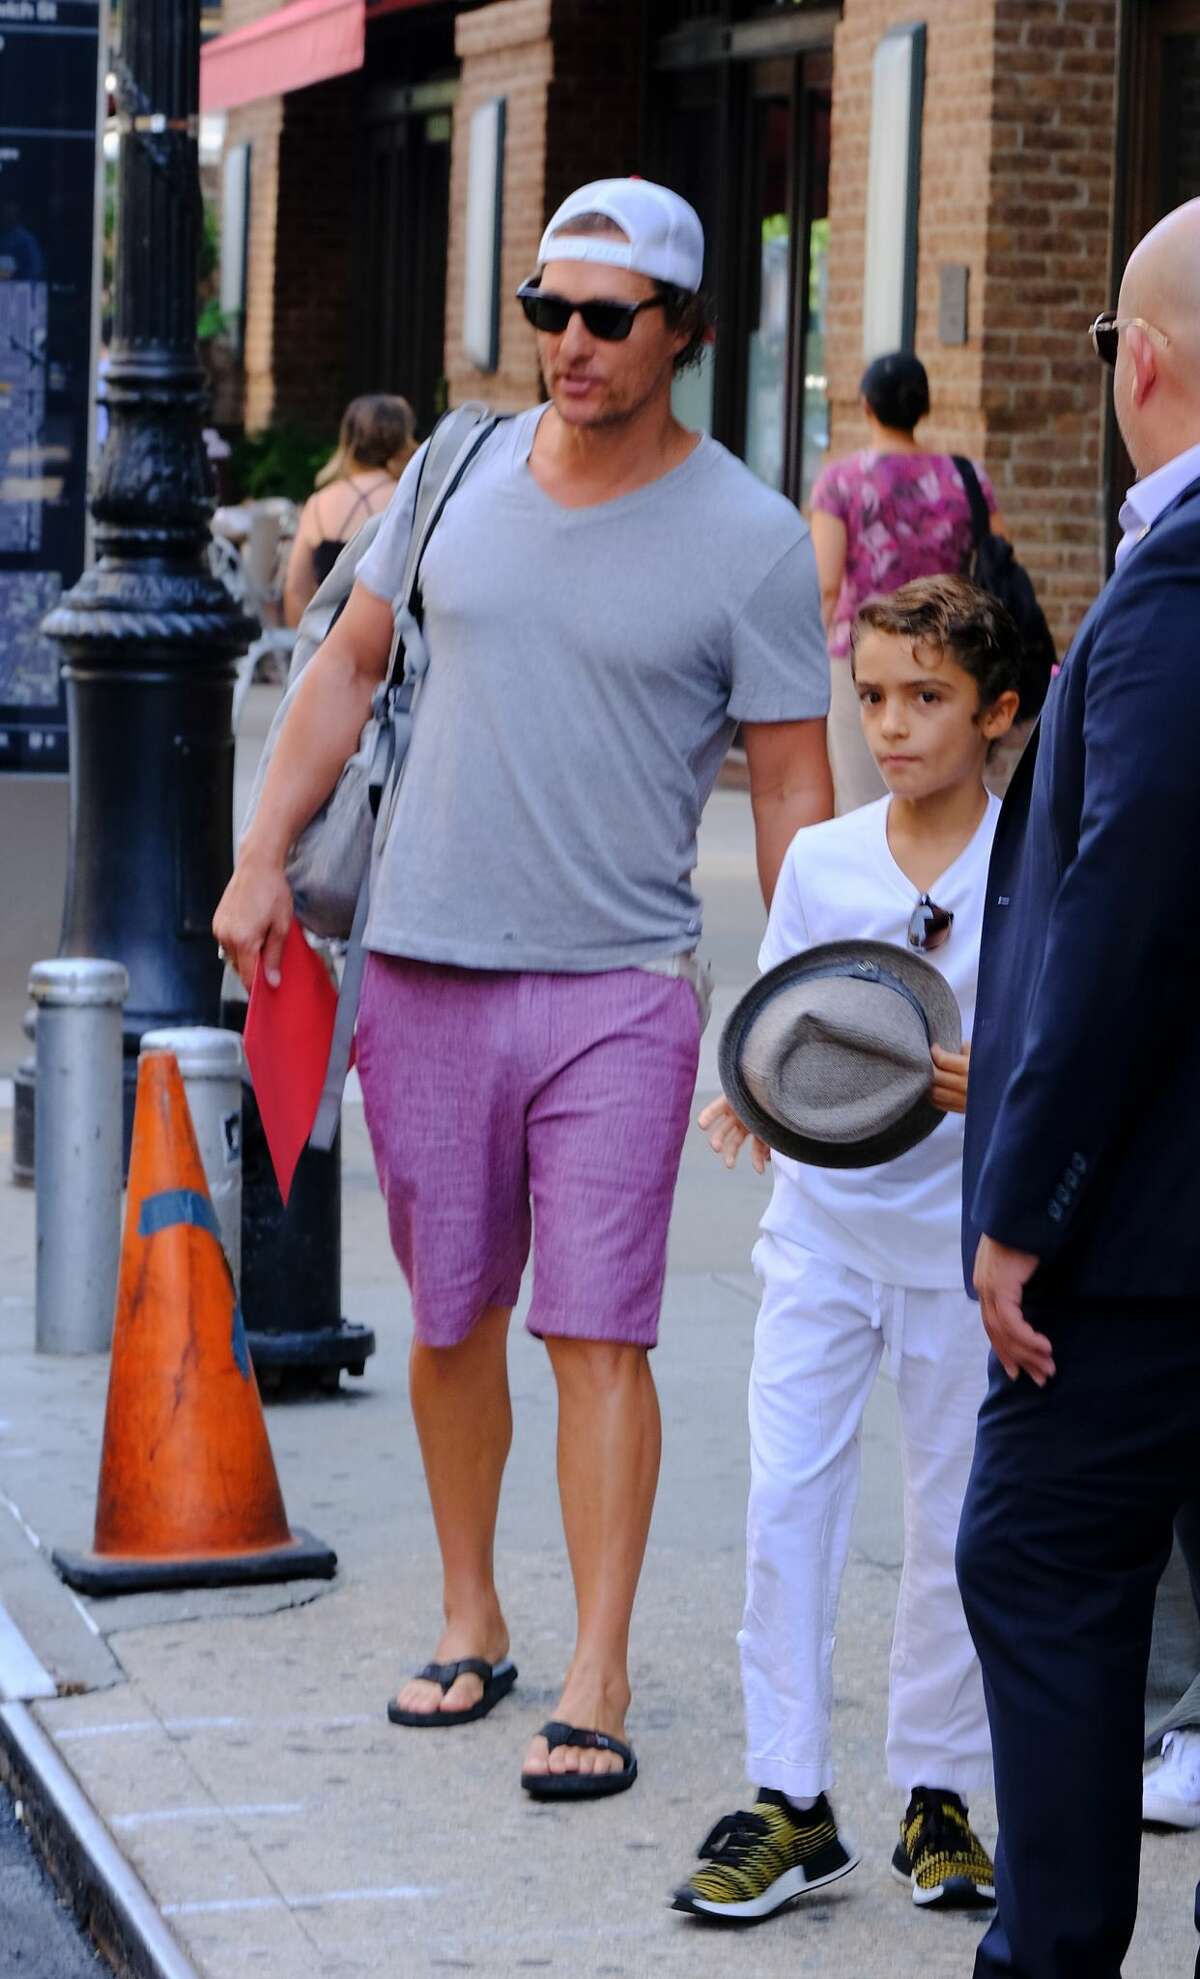 Matthew McConaughey looks like your typical dad next to his glammed up